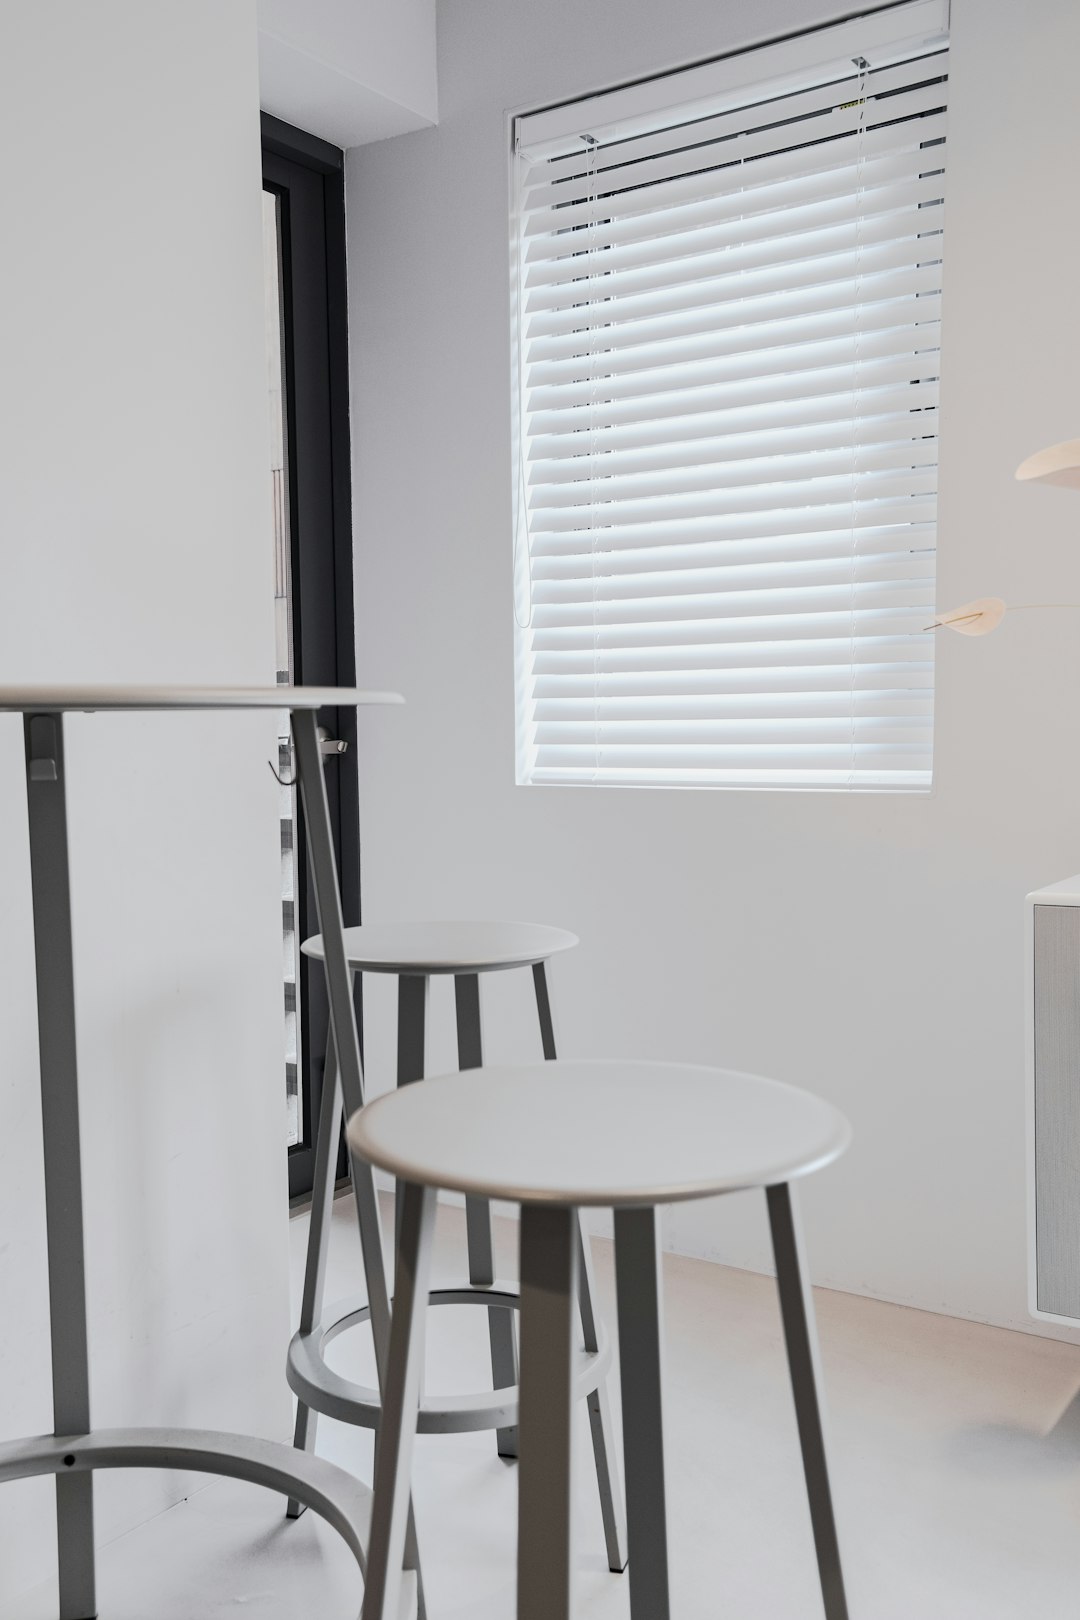 white and black wooden seat beside white window blinds